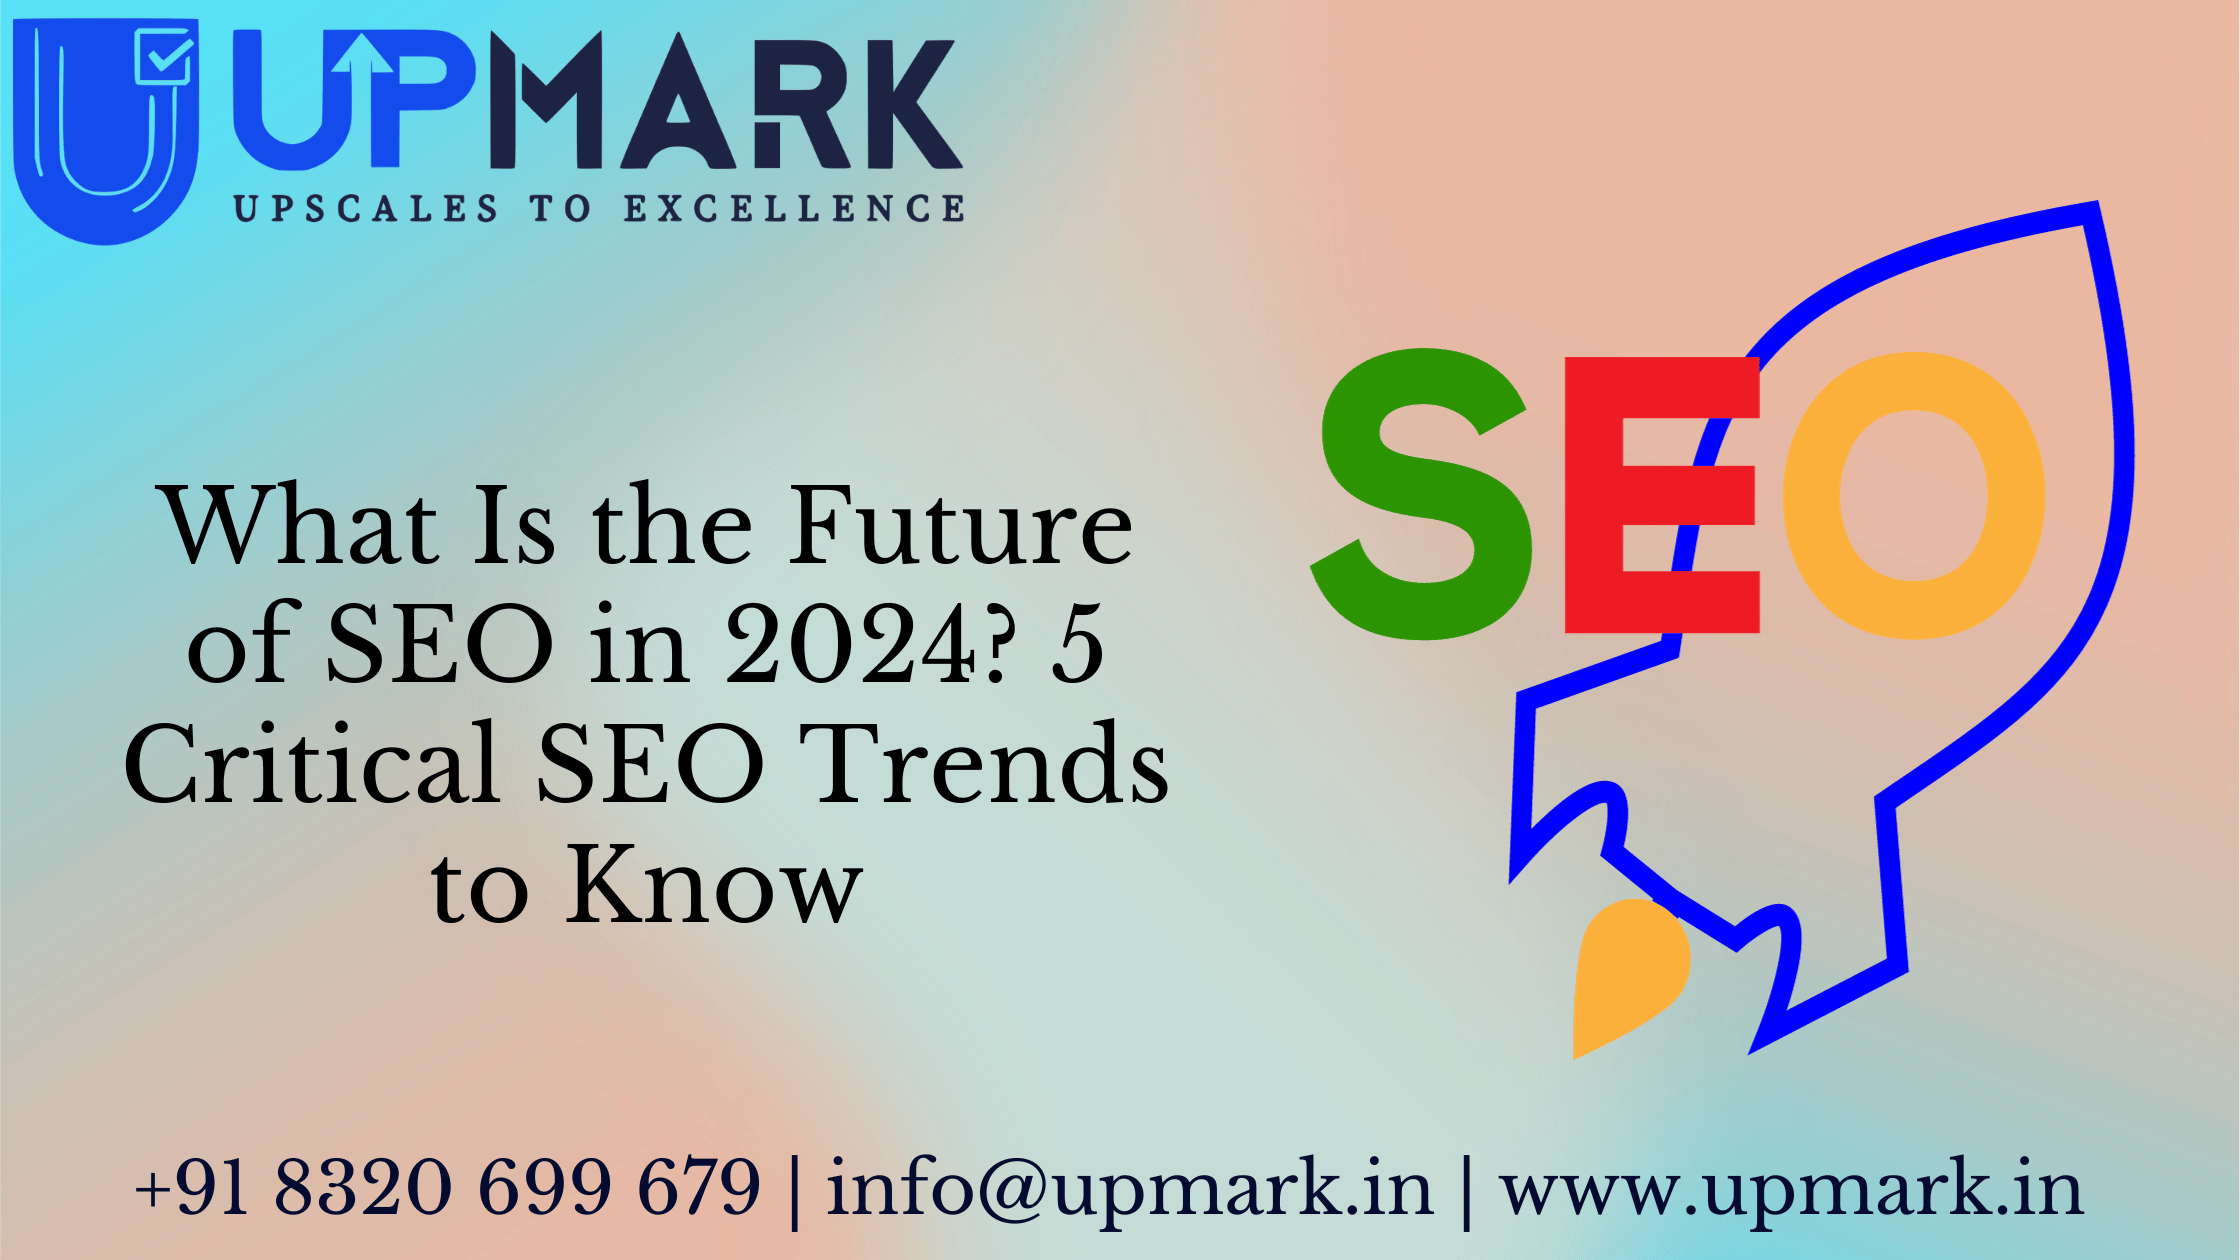 What Is the Future of SEO in 2024? 5 Critical SEO Trends to Know